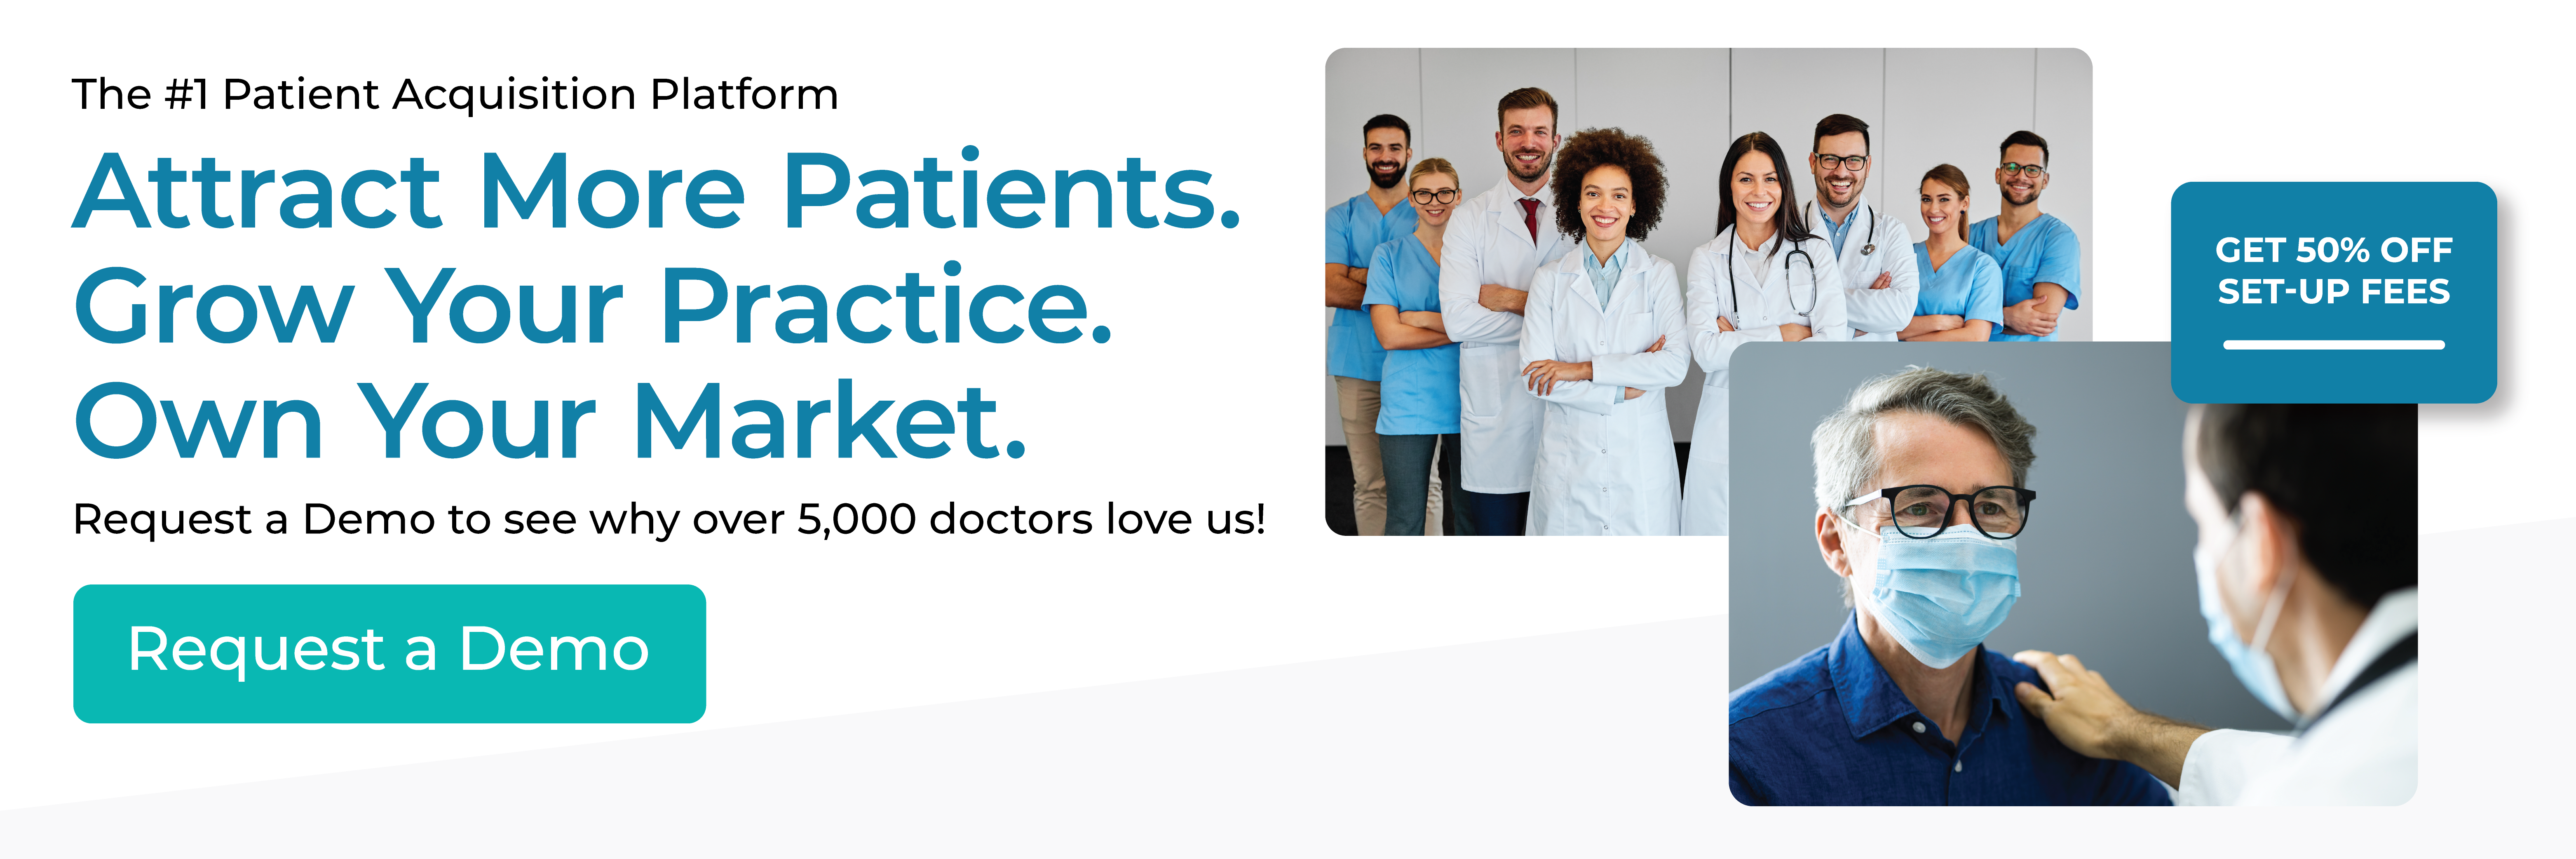 Request a Demo with DoctorLogic